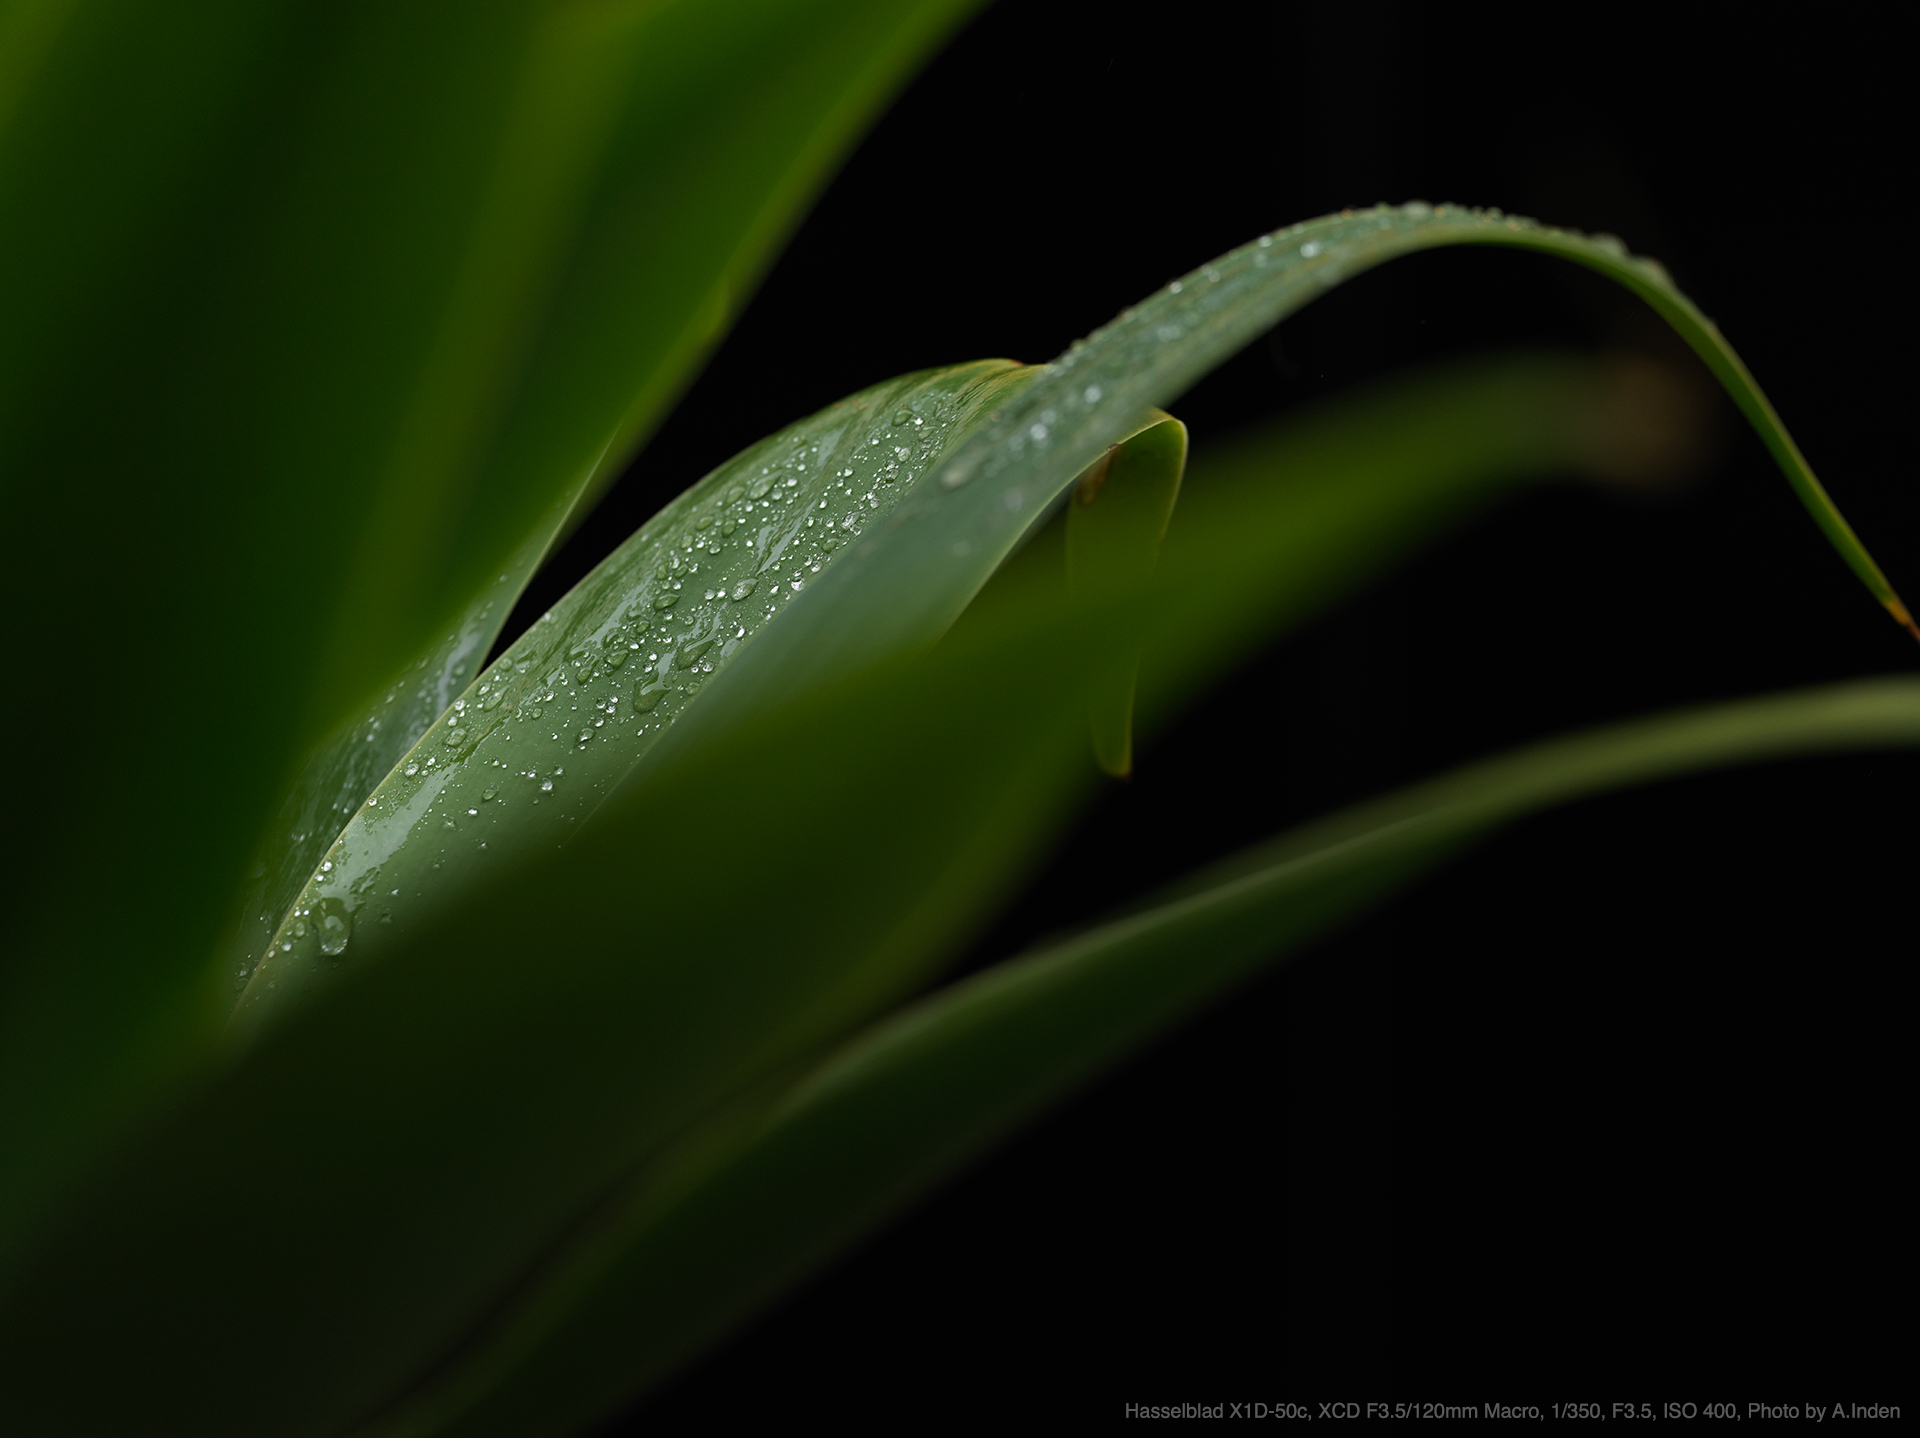 Hasselblad X1D-50c, XCD F3.5/120mm Macro, Photo by A.Inden